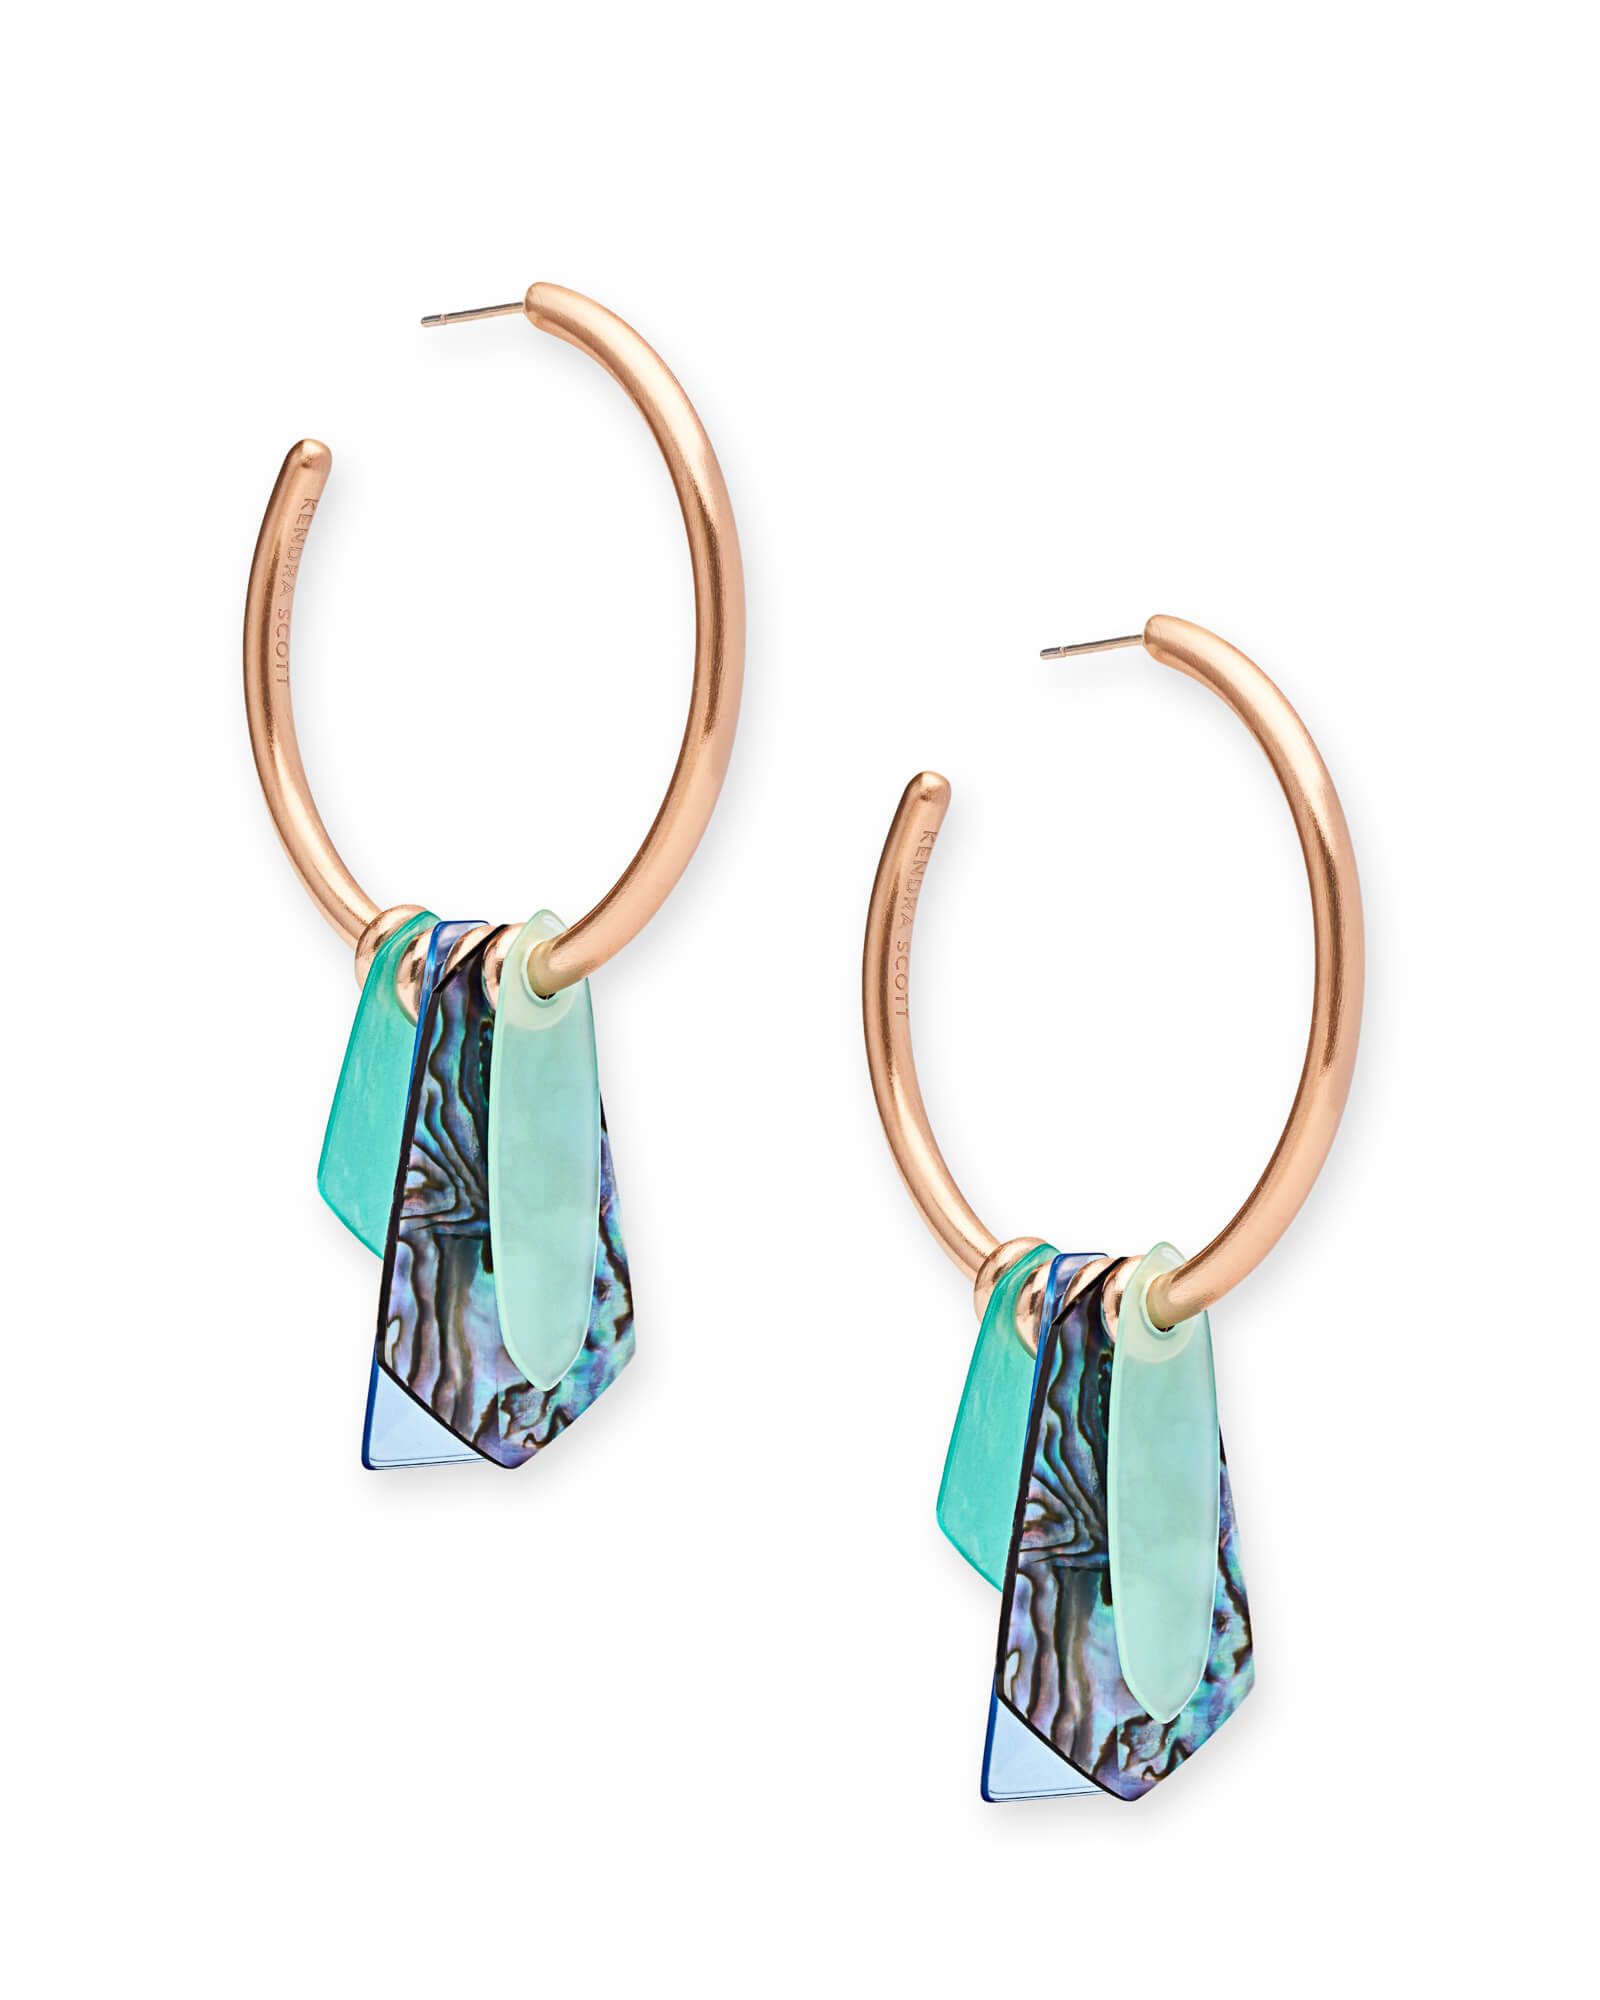 Gaby Rose Gold Statement Earrings in Abalone Mix | Kendra Scott